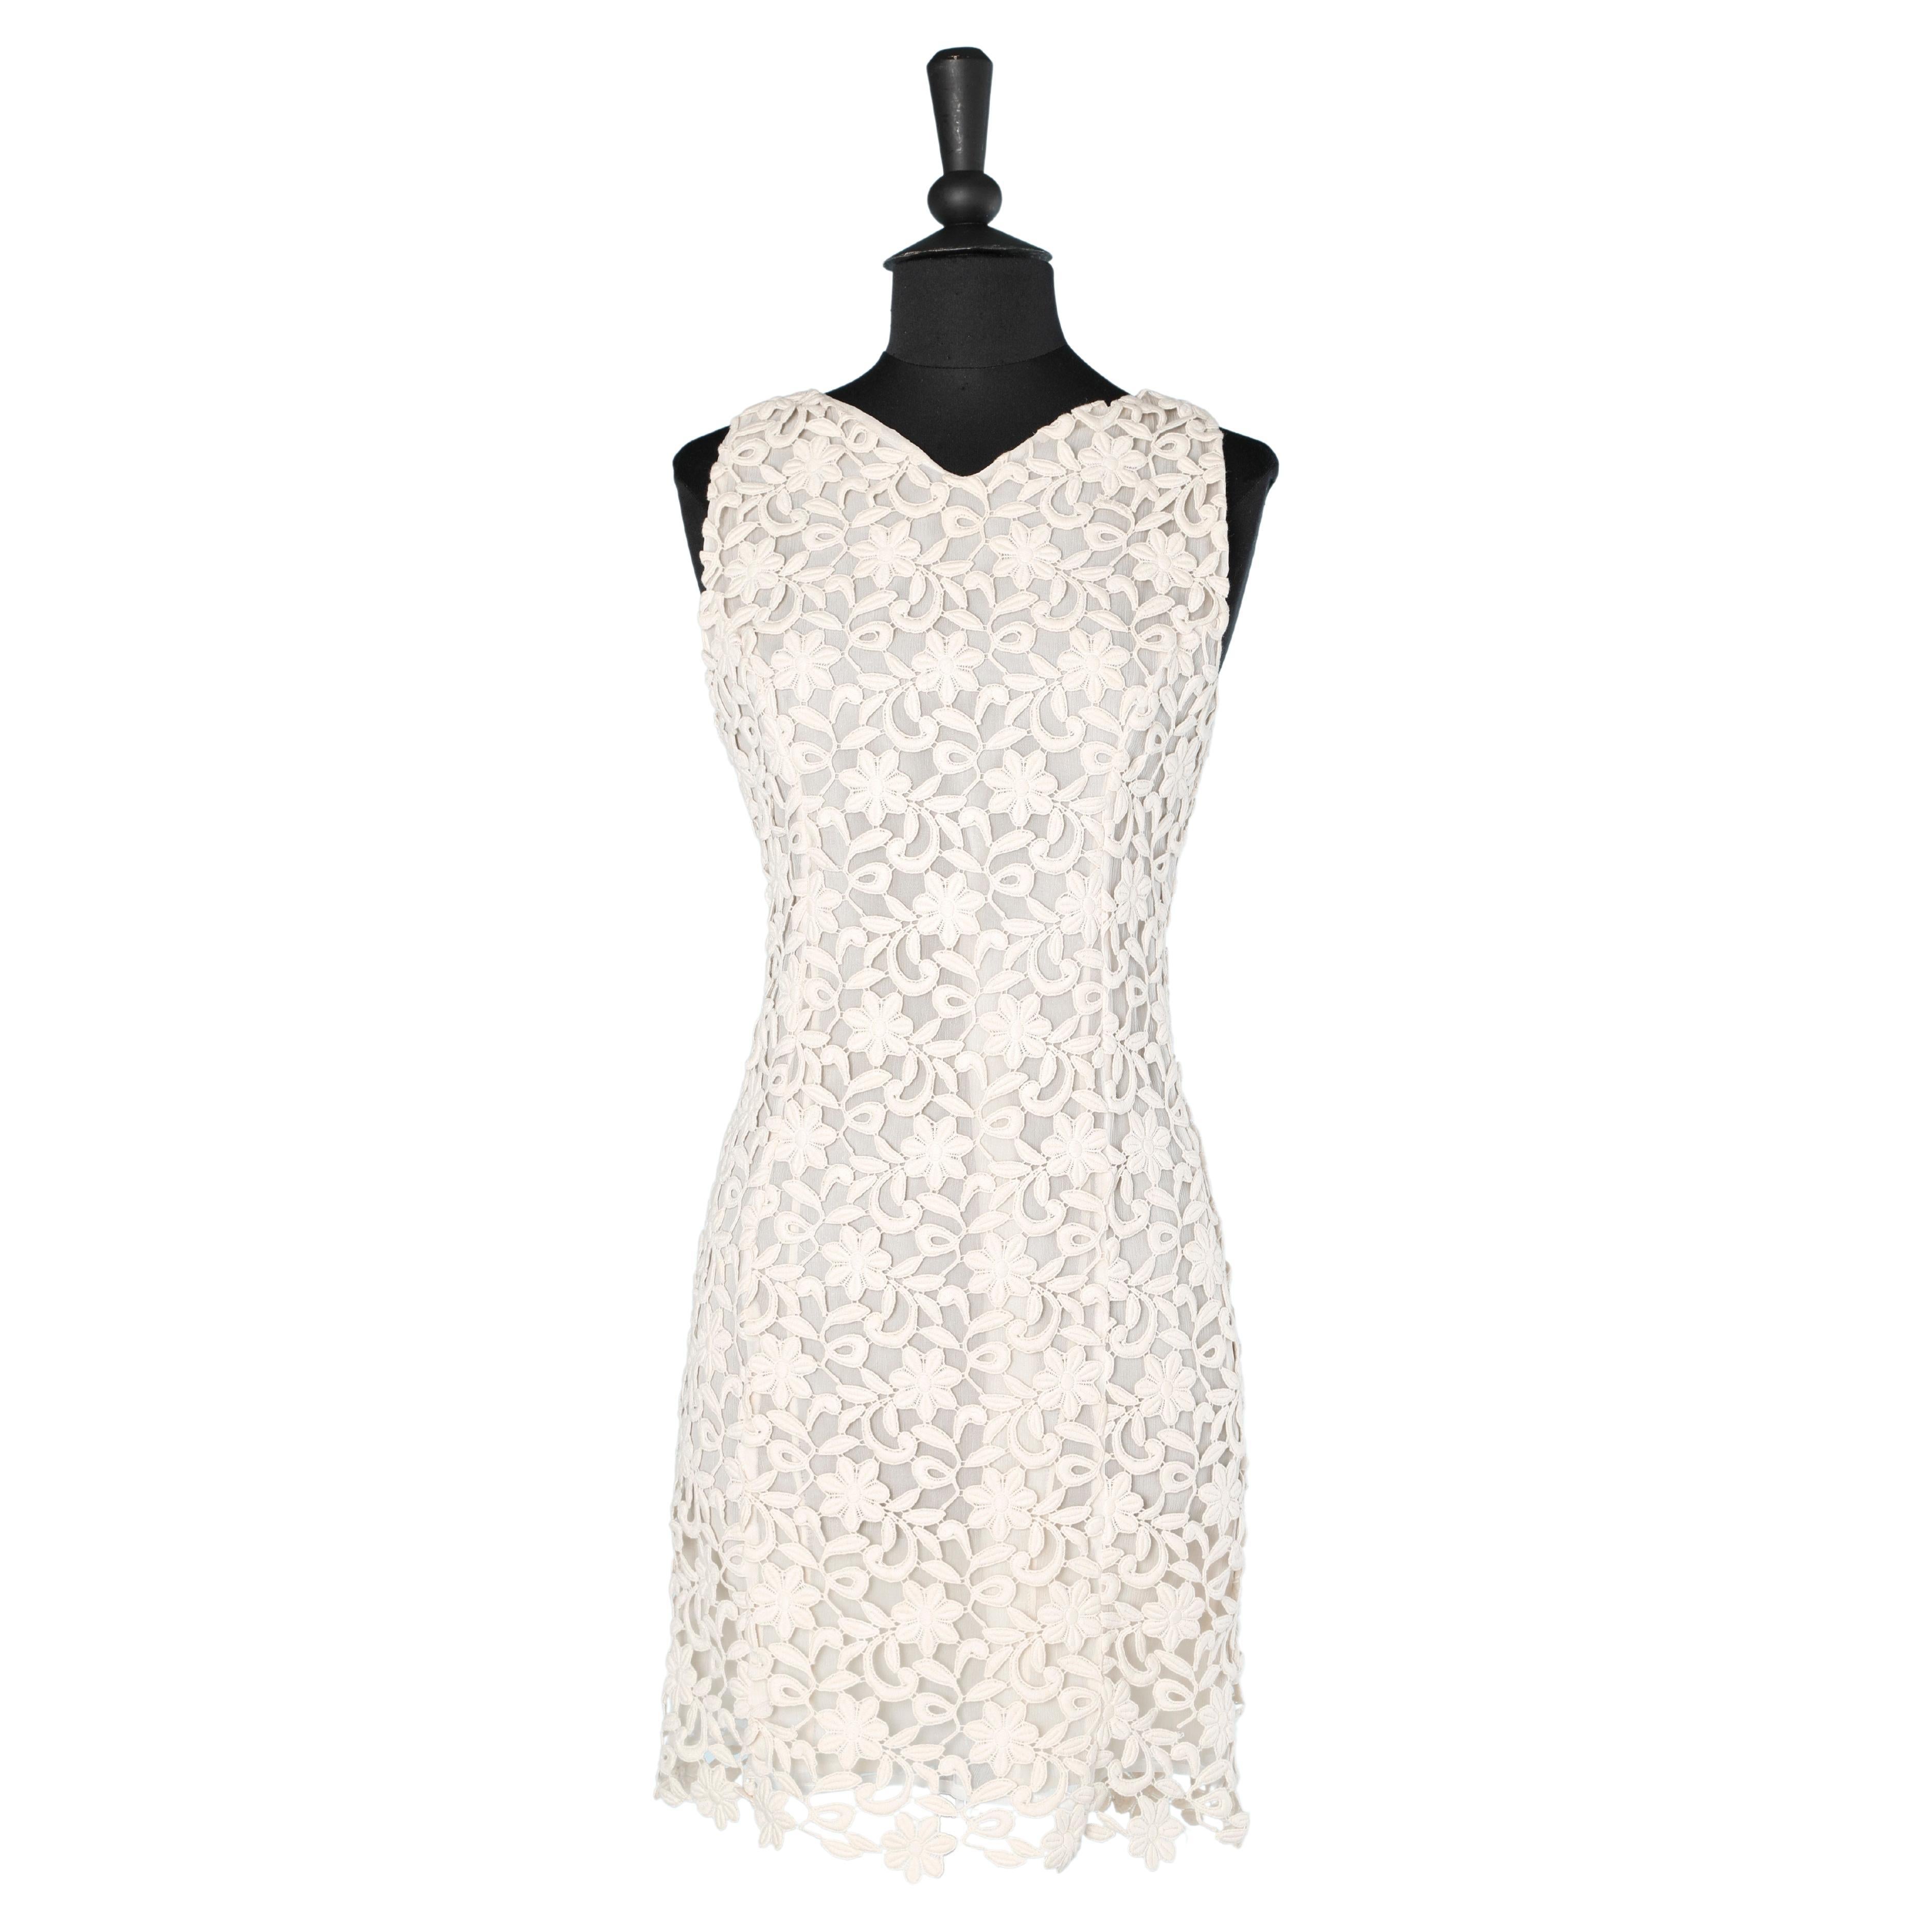 Off-white guipure sleeveless dress with zip in the middle back Antonio Berardi  For Sale